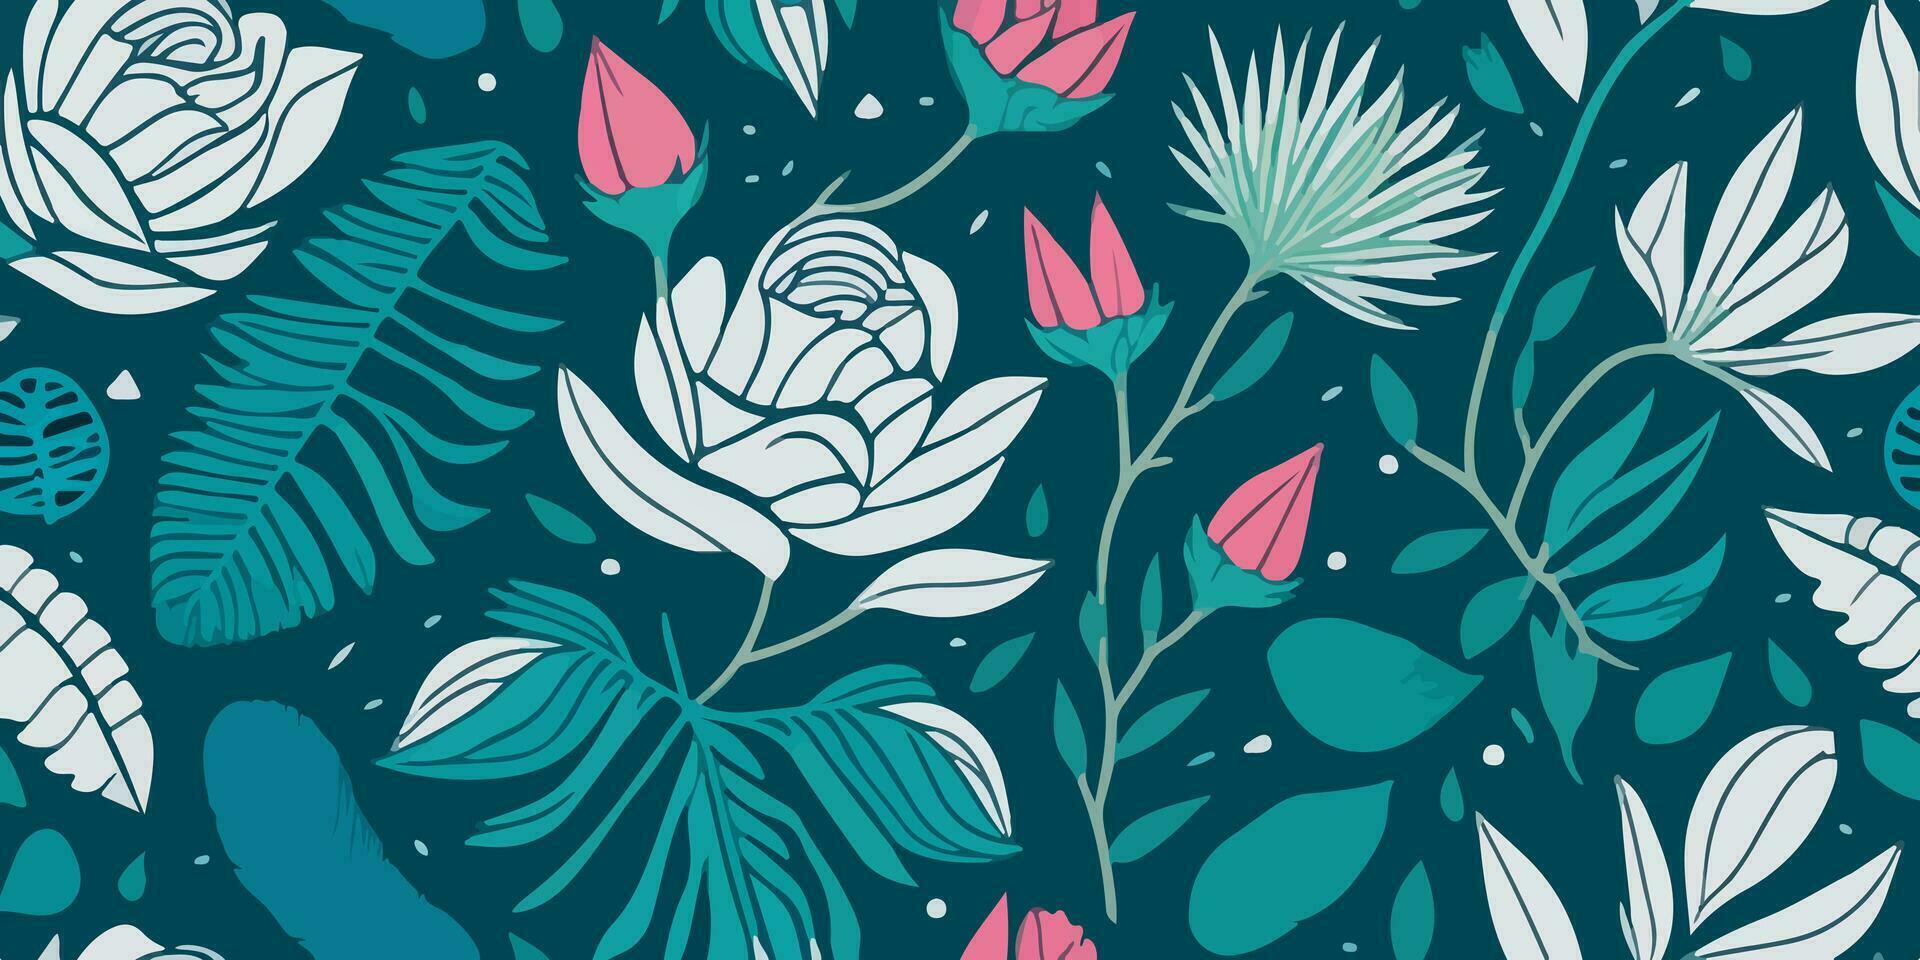 Vibrant Nature Patterns. Embracing the Blossom of Spring vector